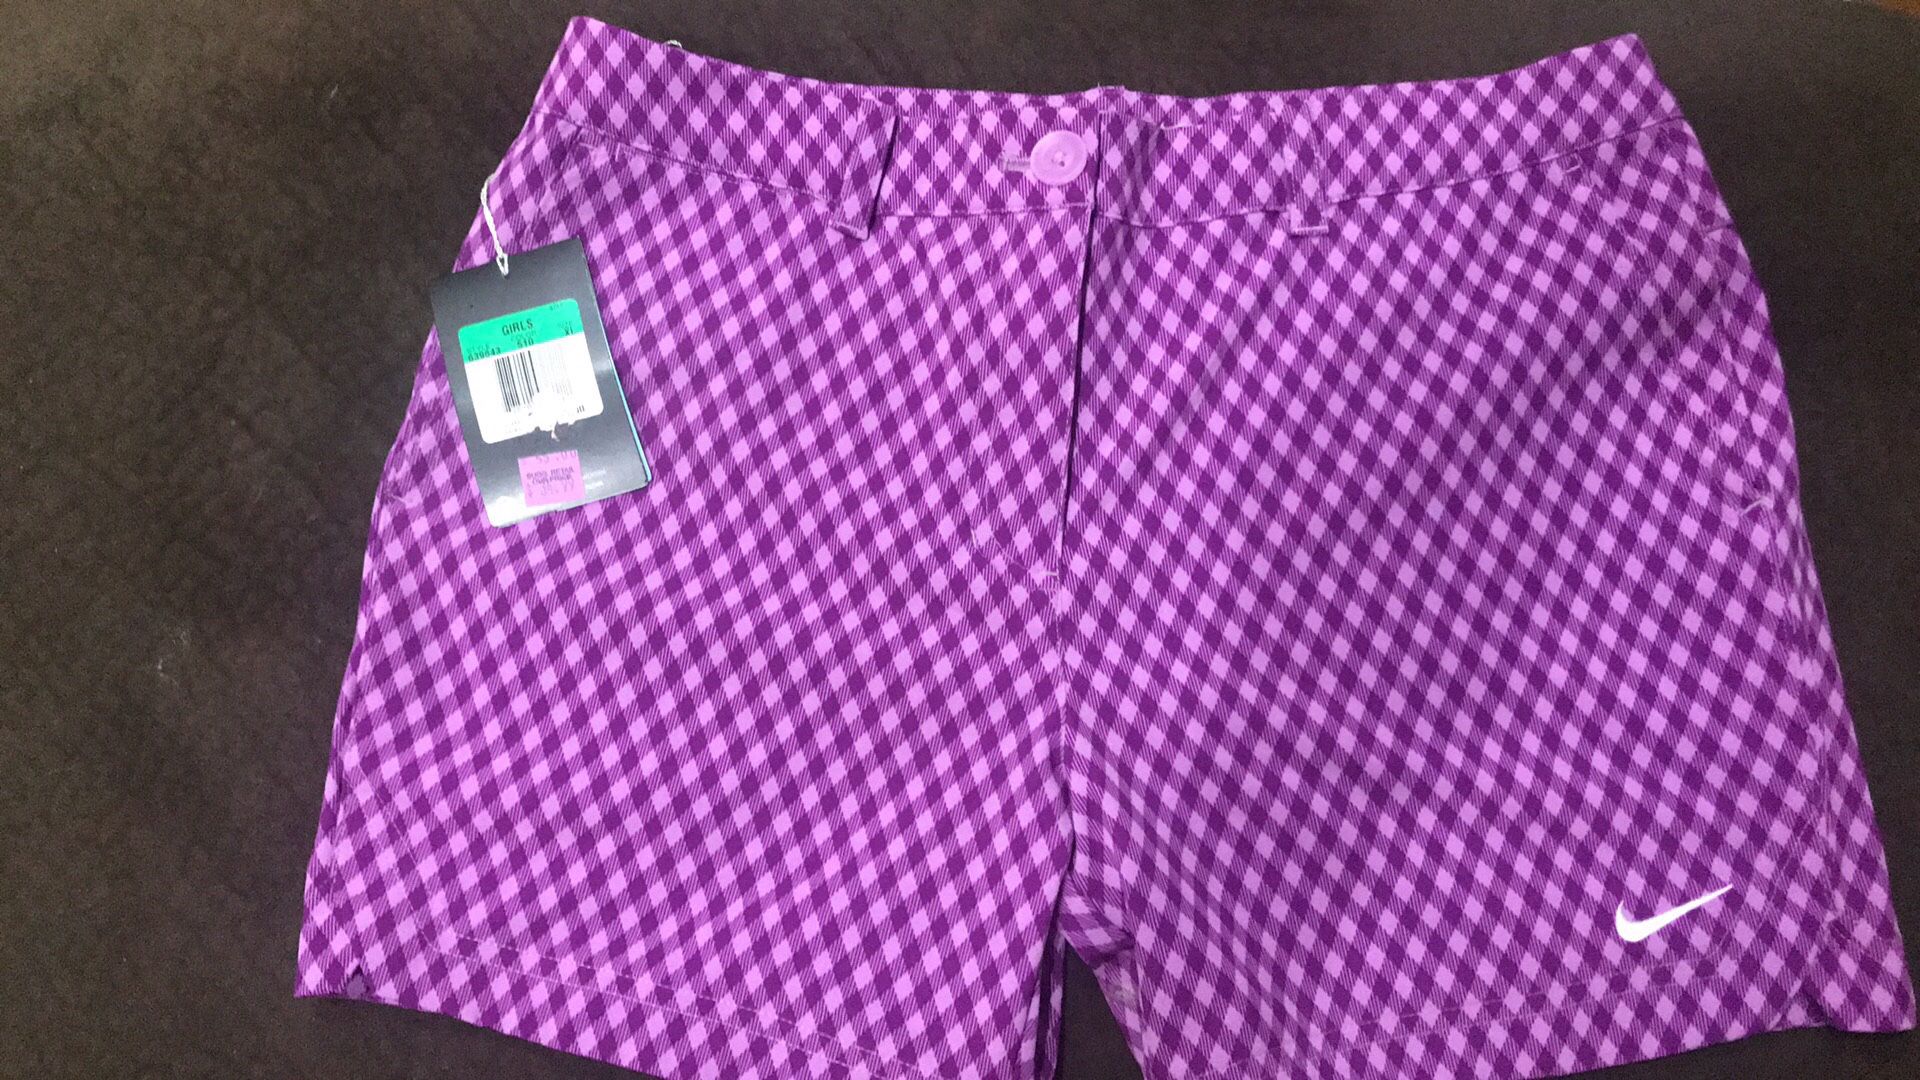 Nike “golf” Style Shorts Size Girls Xl (14-16) New With Tags for Sale ...